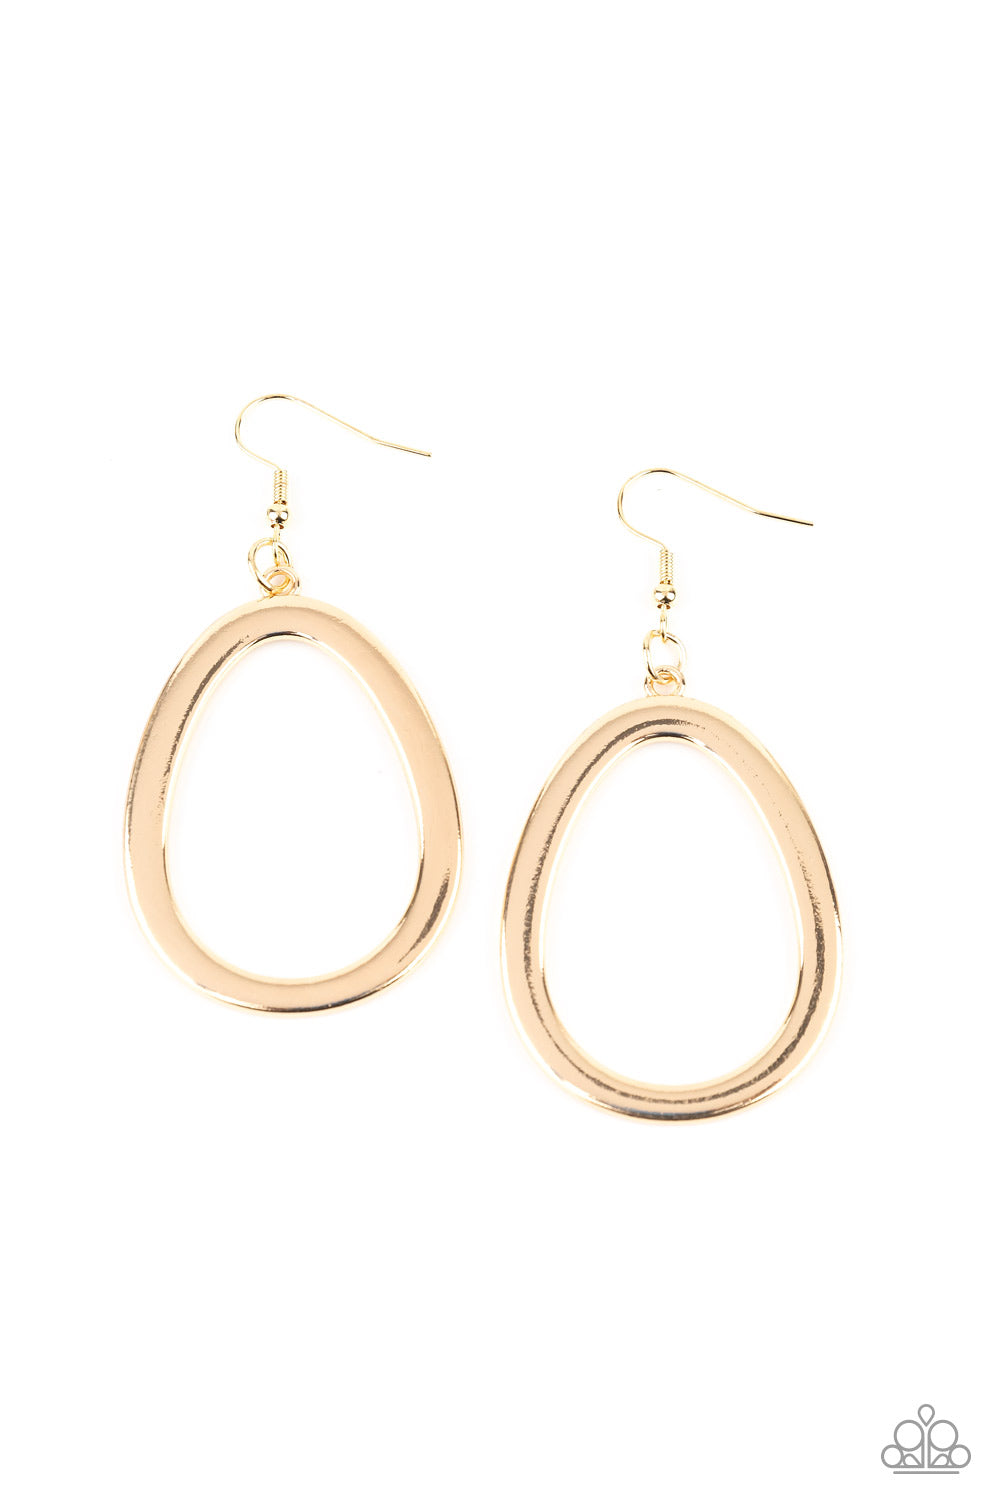 CASUAL CURVES - GOLD EARRING